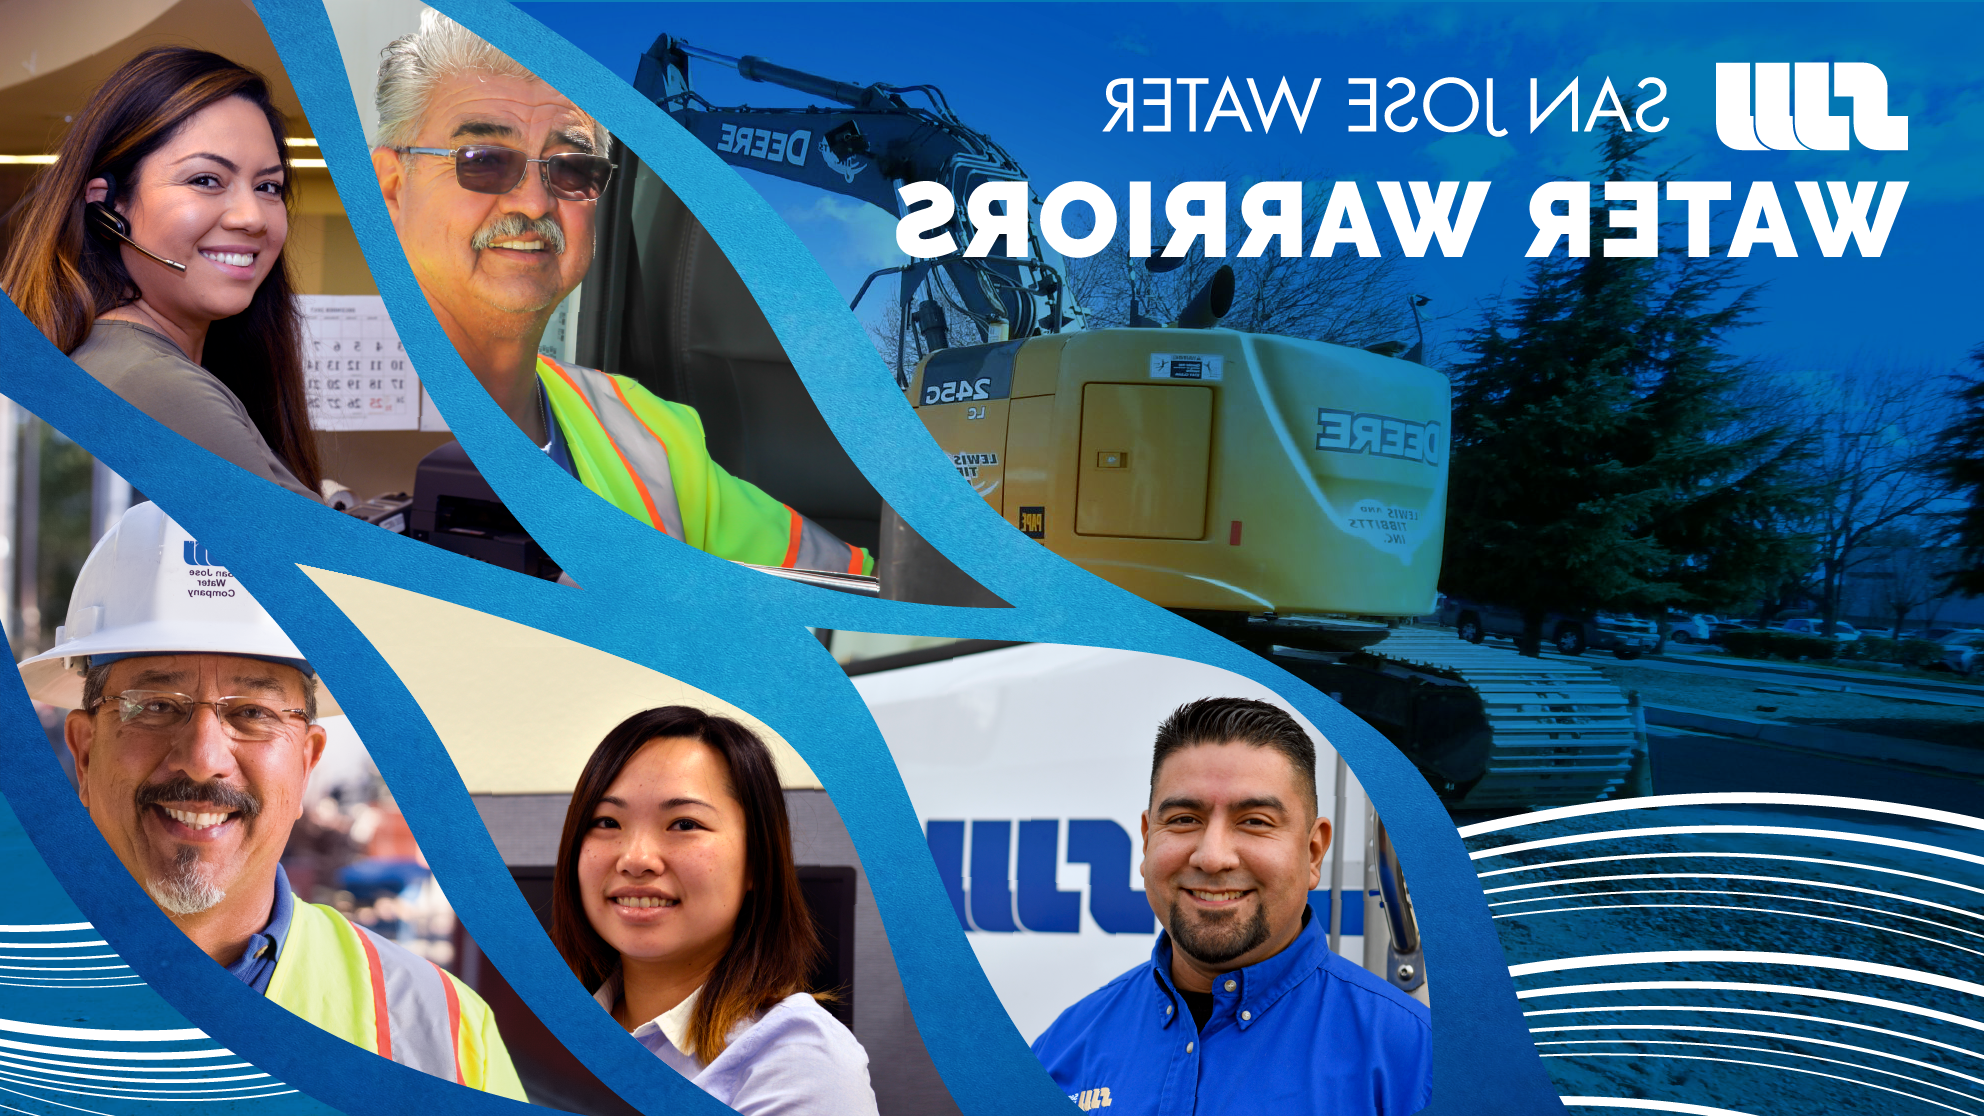 San Jose Water Water Warriors - 5 employees in a collage